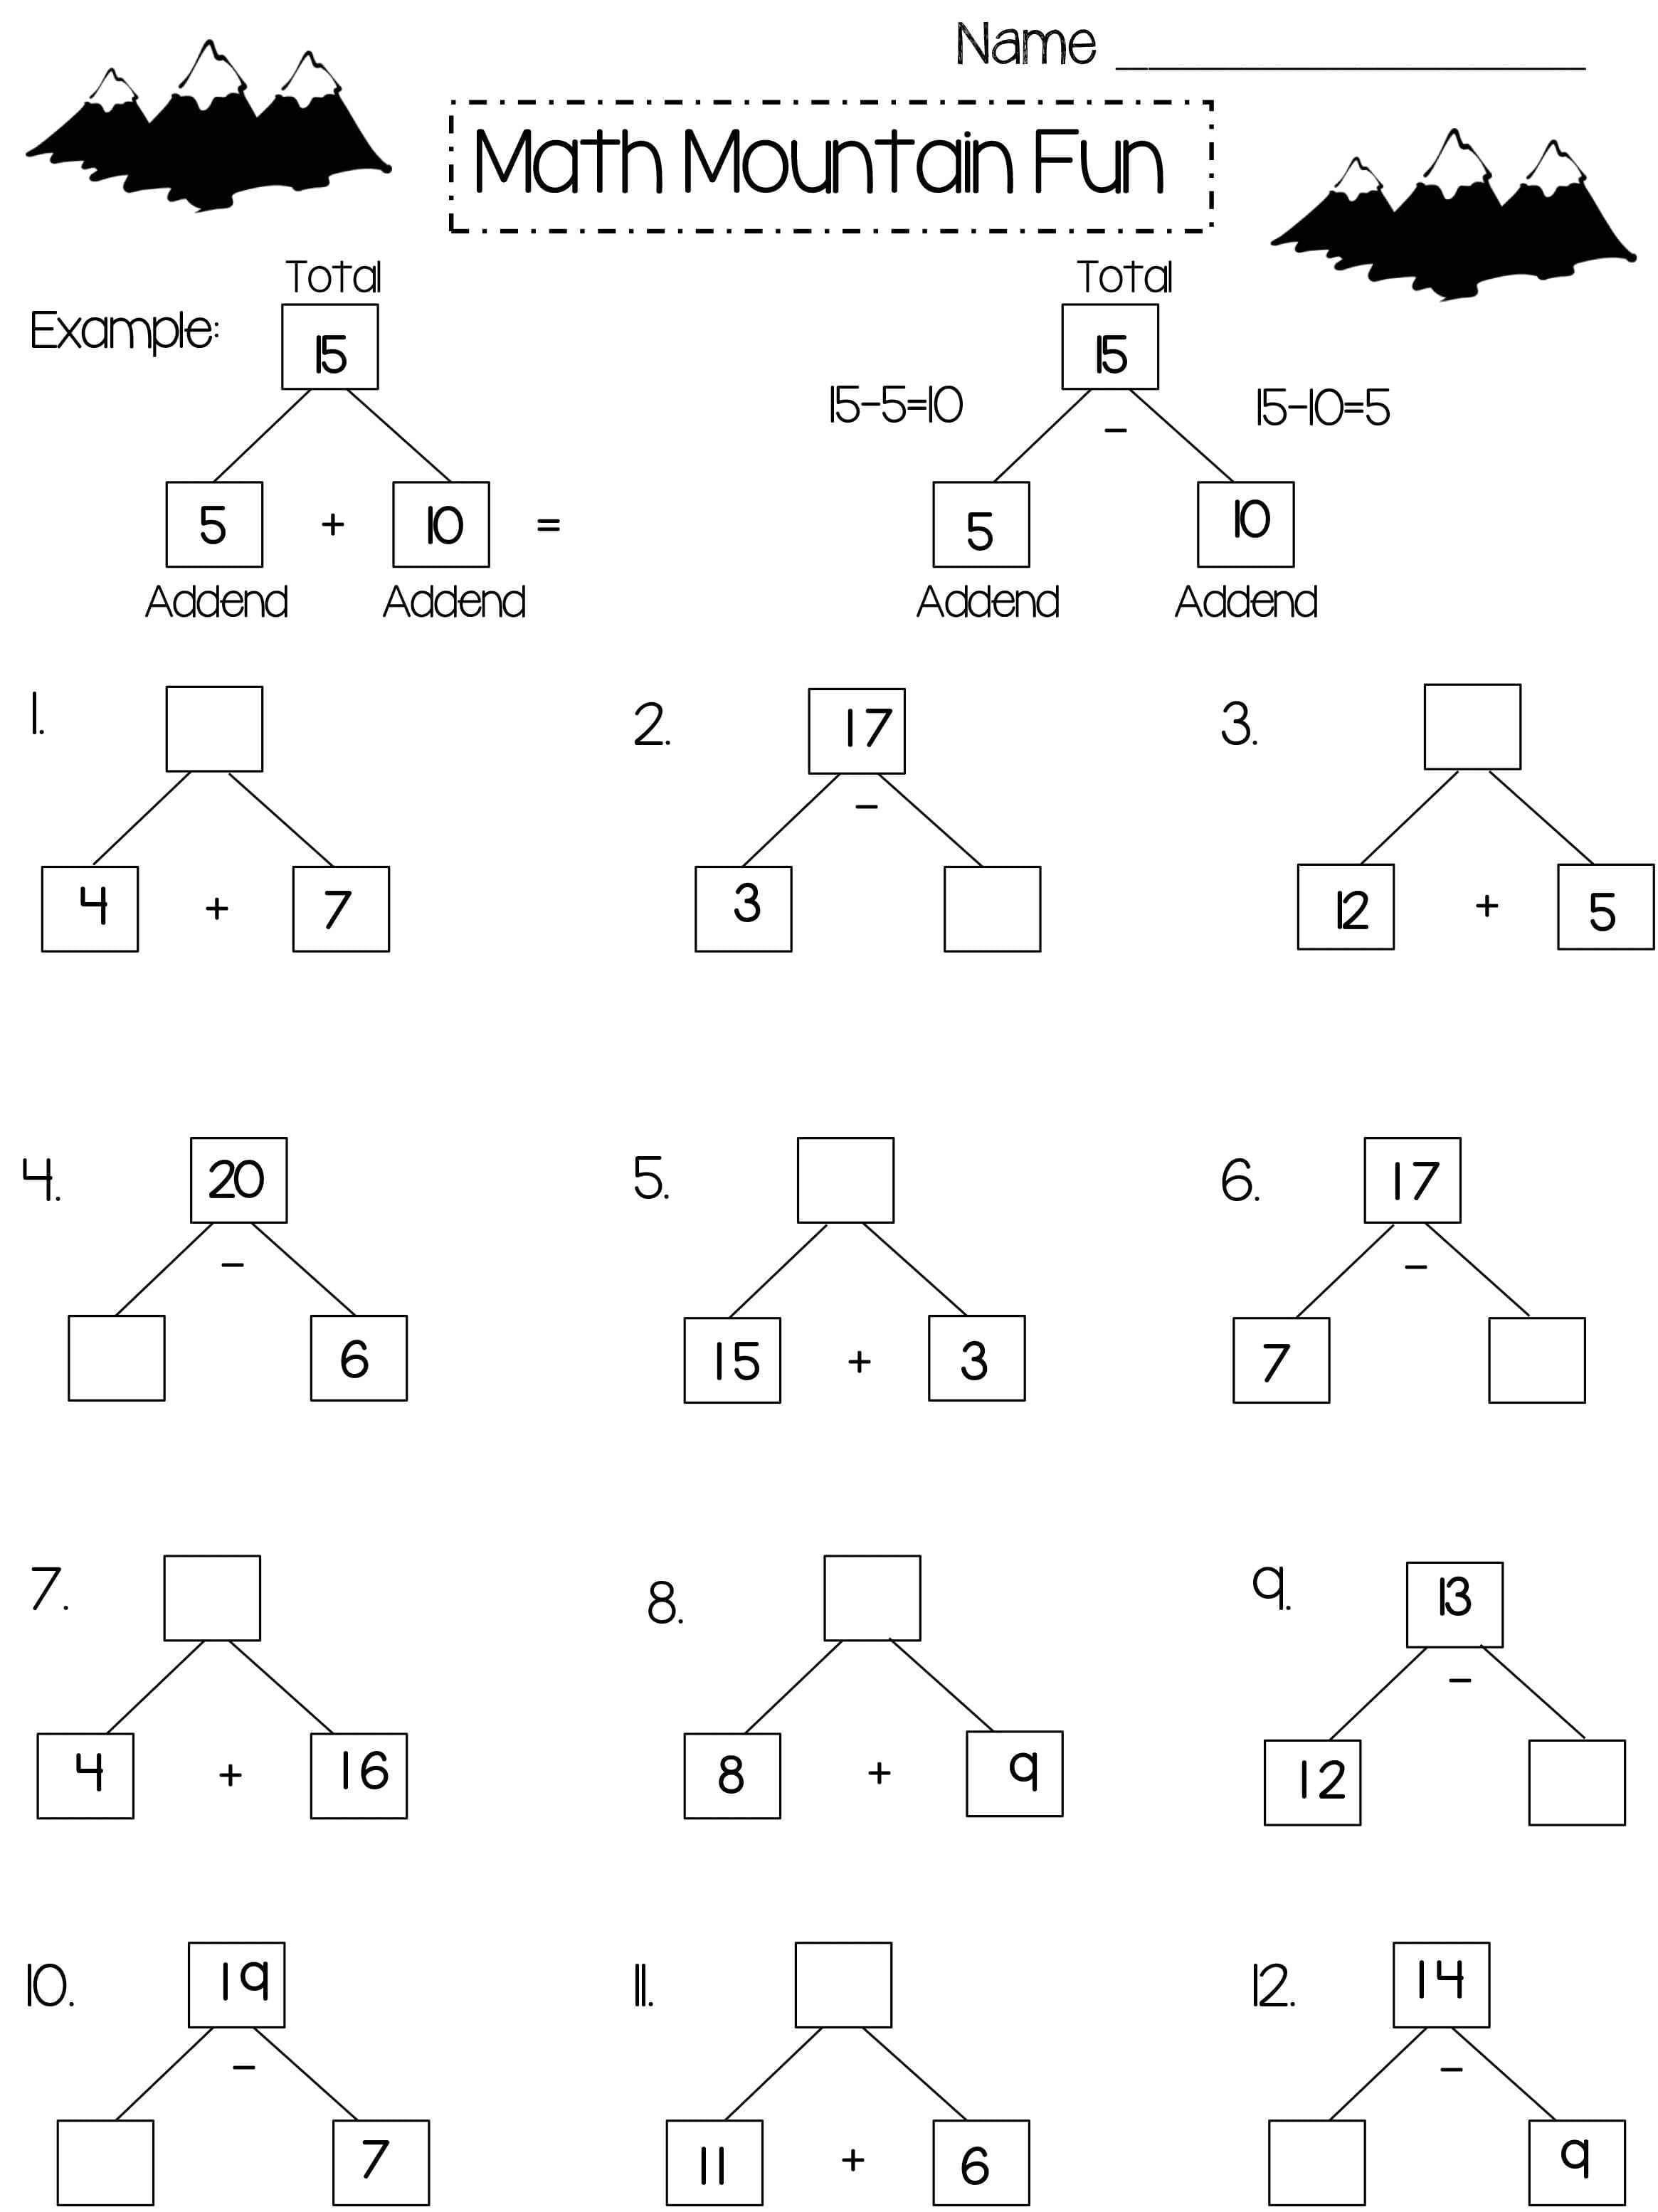 Common Core Worksheets For 2Nd Grade At Commoncore4Kids For Go Math 2Nd Grade Worksheets